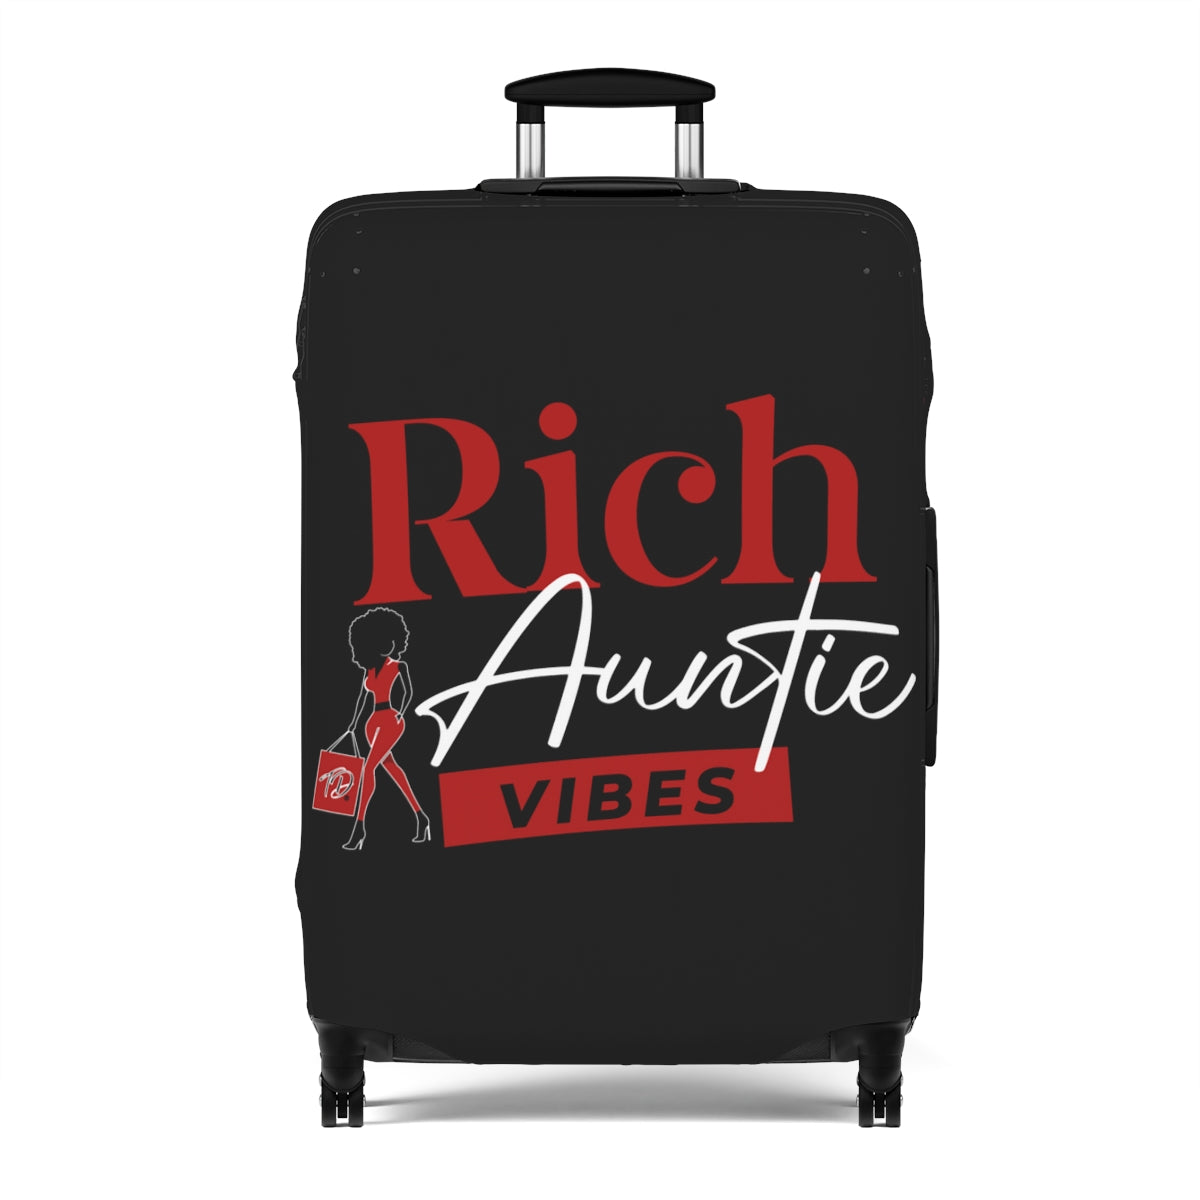 Rich Auntie Large Luggage Cover